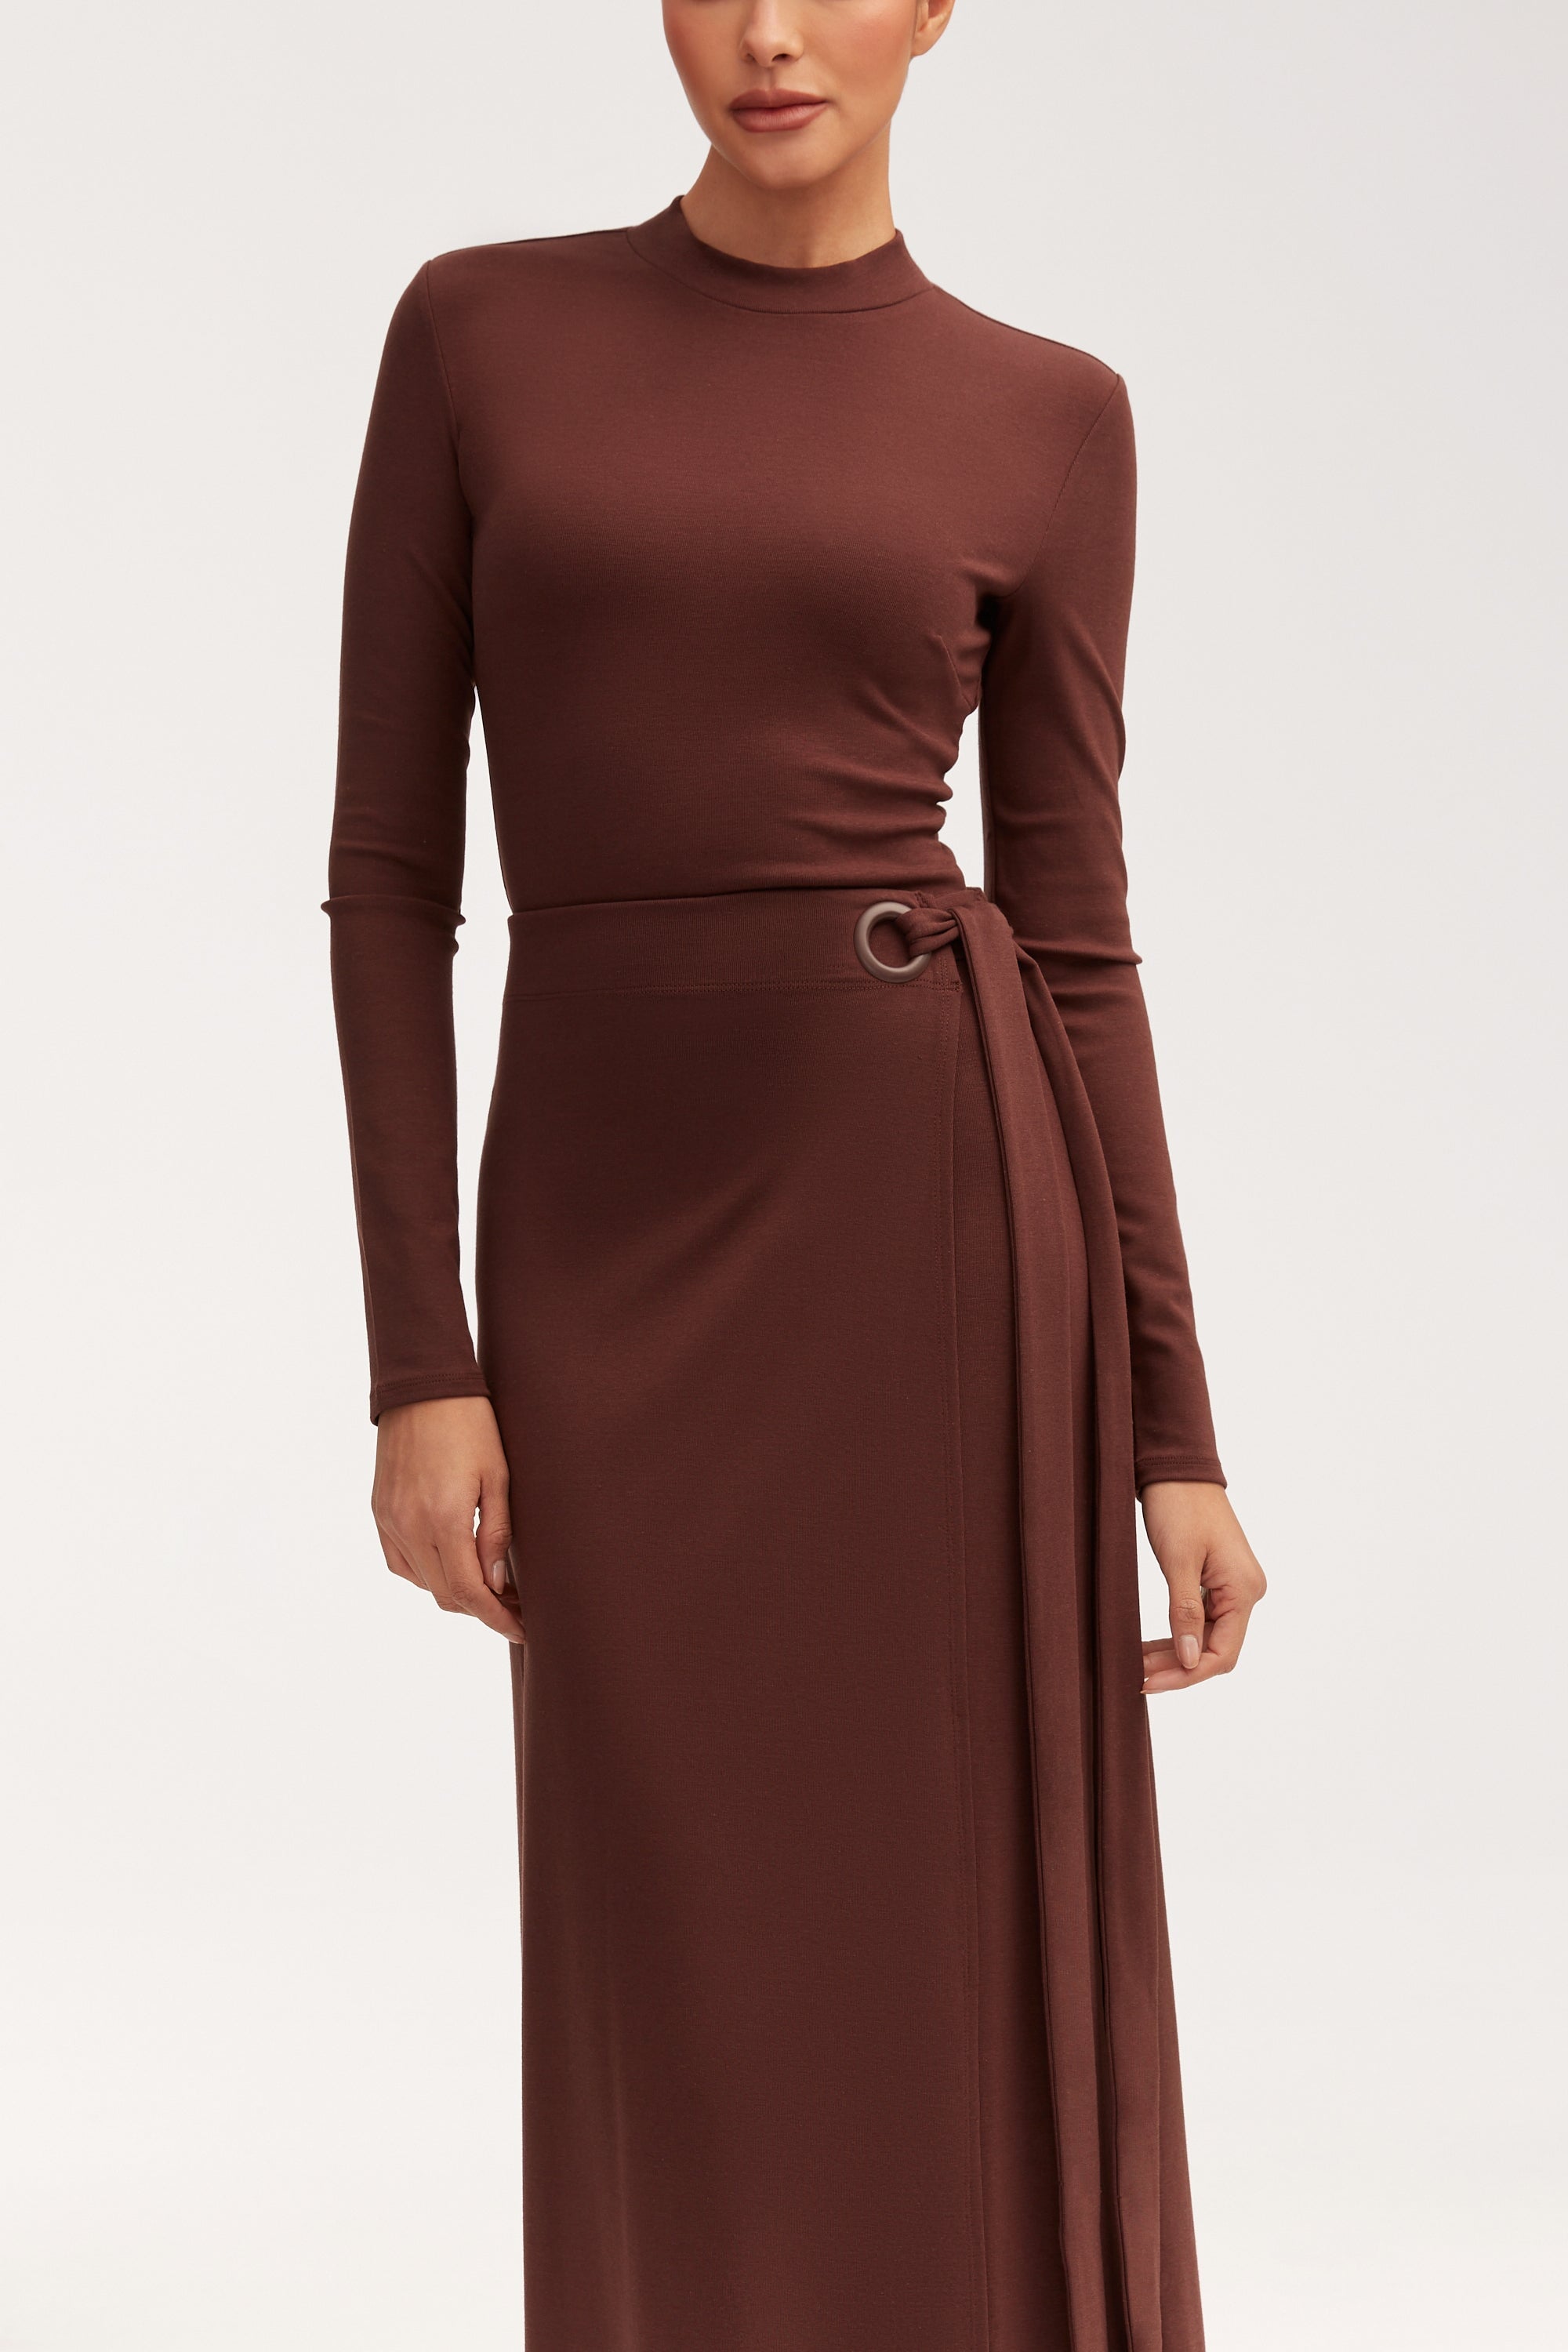 Melissa Jersey Maxi Dress with Wrap Skirt - Brown Sets Veiled 